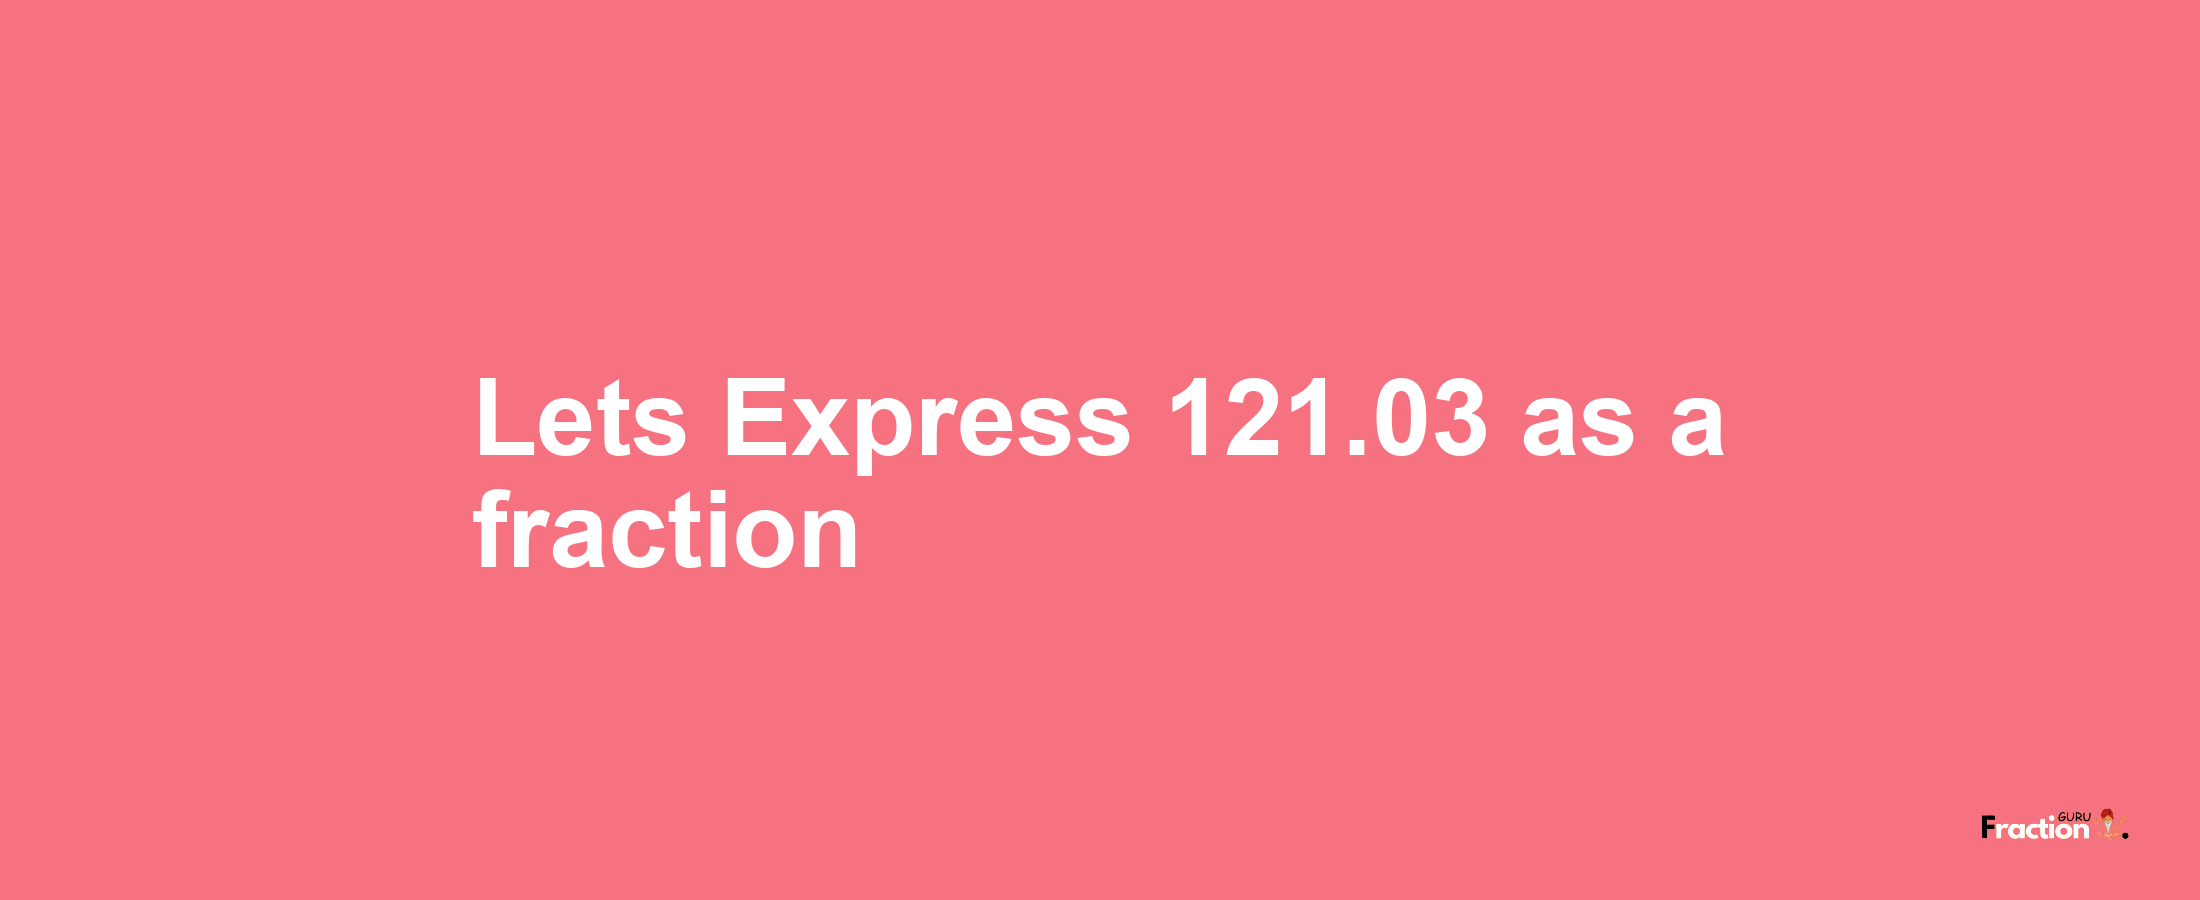 Lets Express 121.03 as afraction